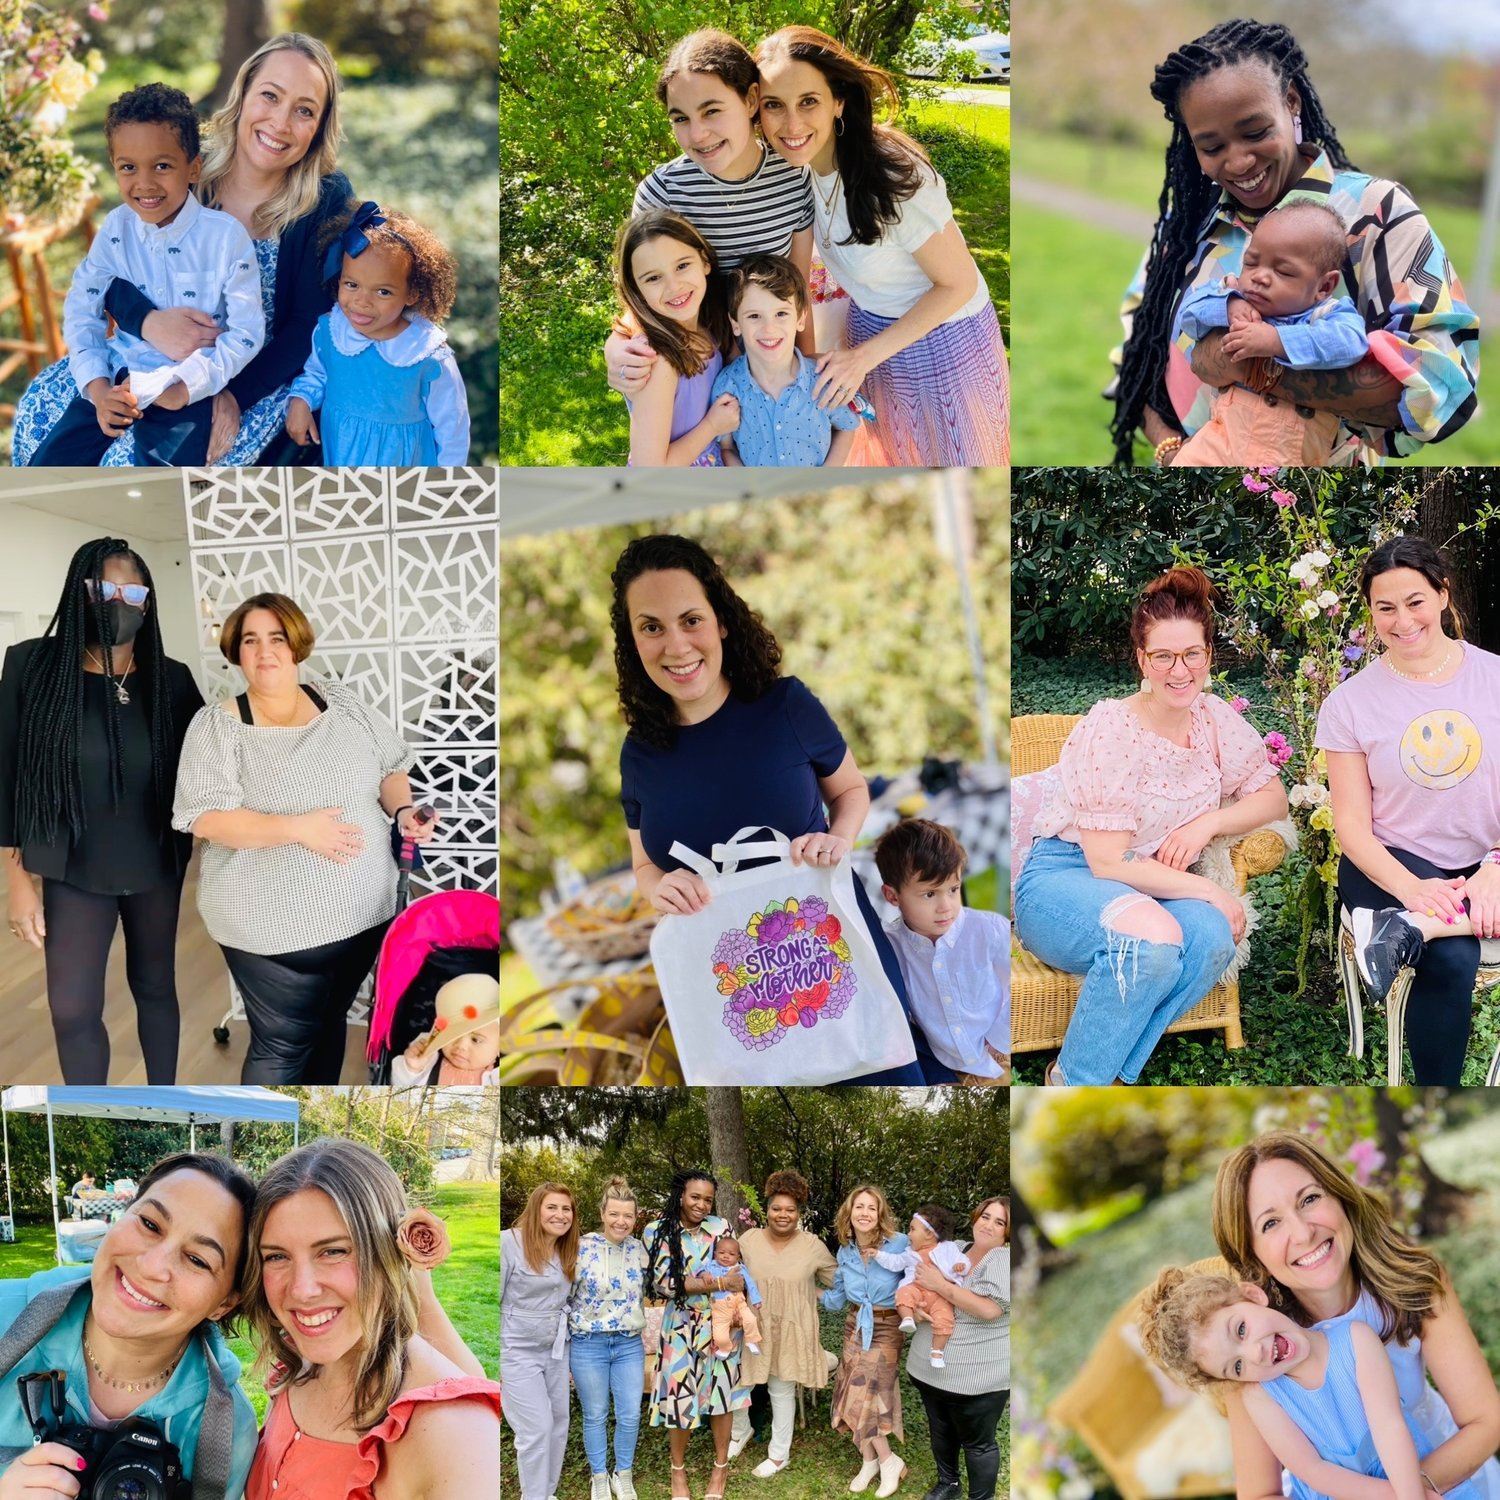 Live Love Lens Holds Special 'Mama and Me' Photo Shoot for 2 Moms, Babies  at Isaiah House - The Village Green